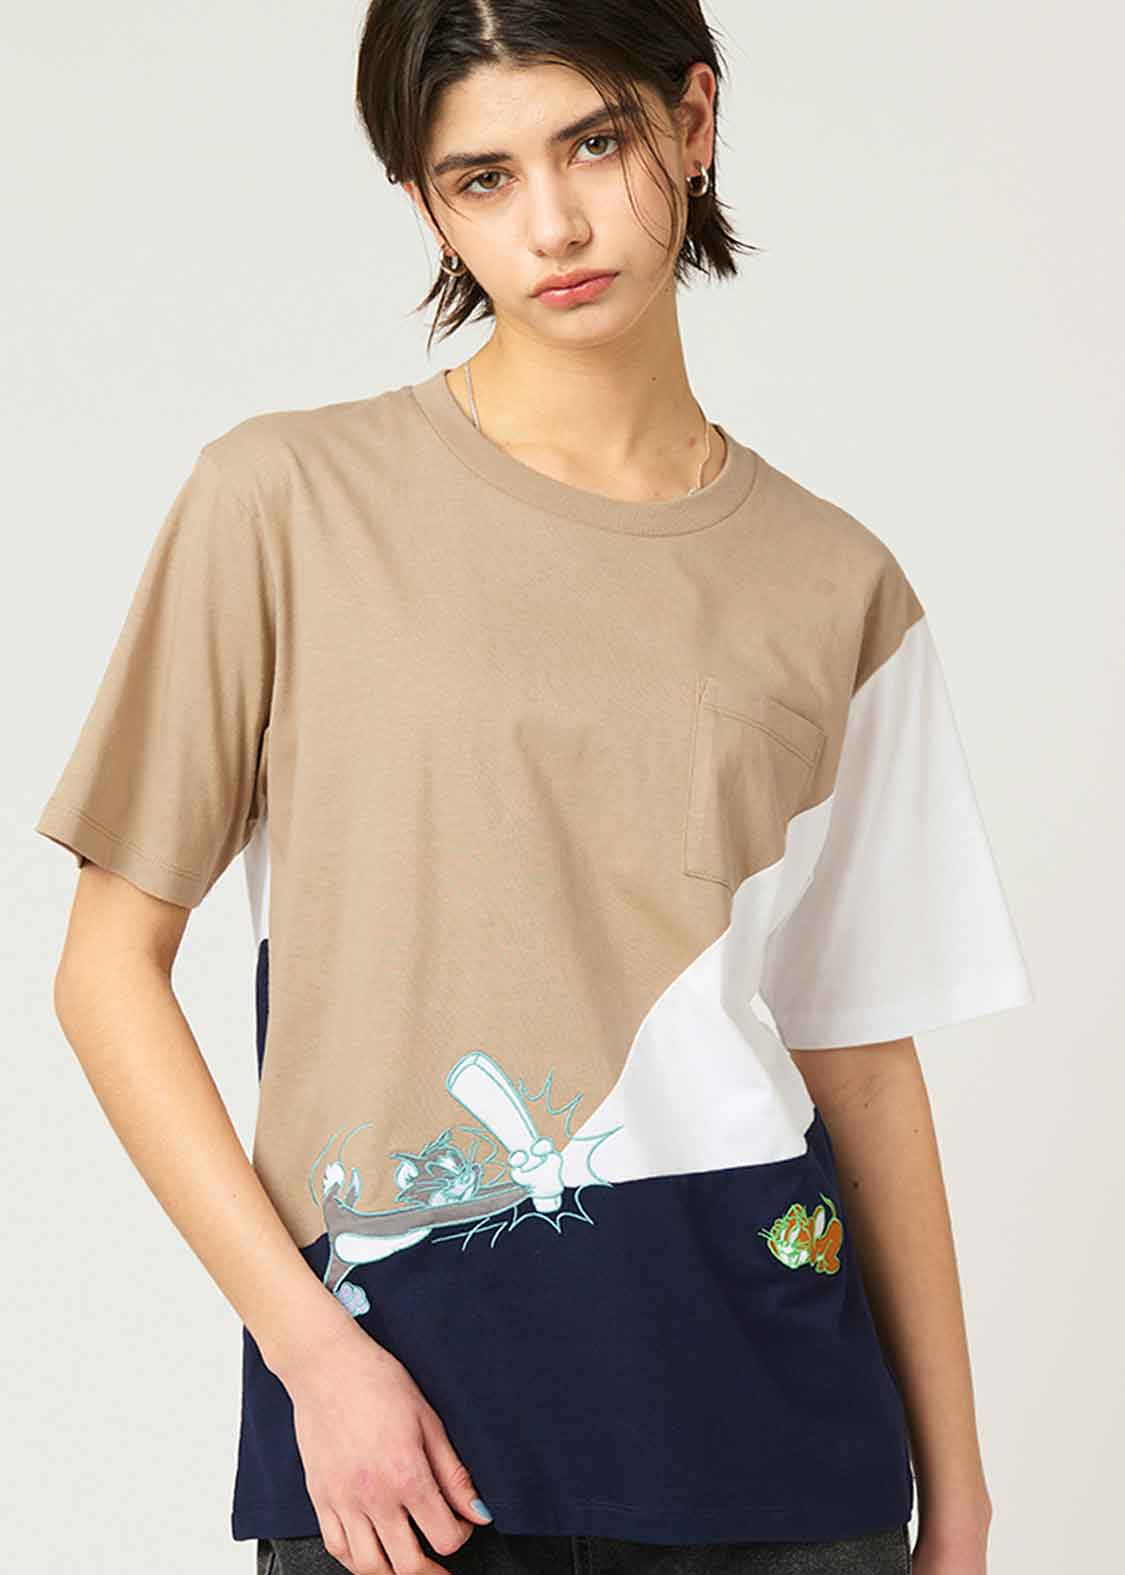 Tom and Jerry Bicolor Short Sleeve Tee (Tom and Jerry_Home run)